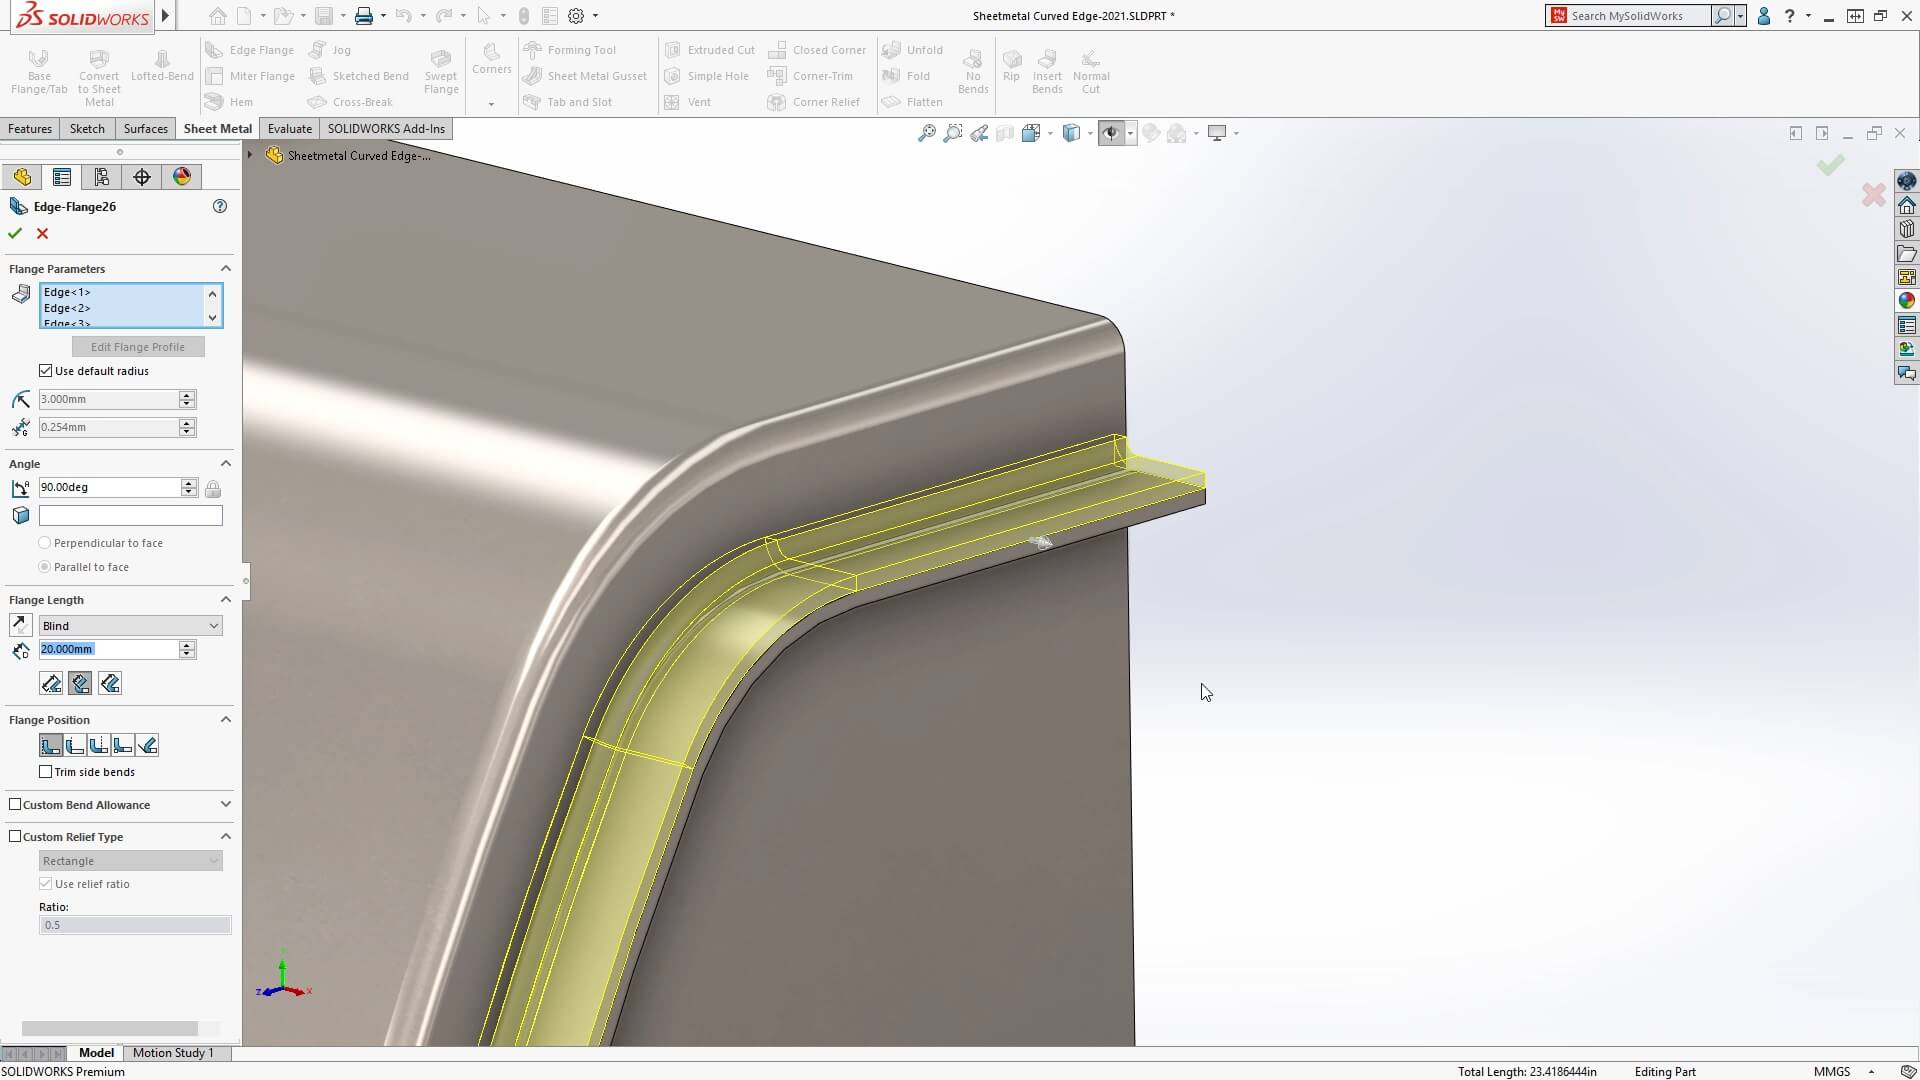 Dassault Systemes vs Solidworks